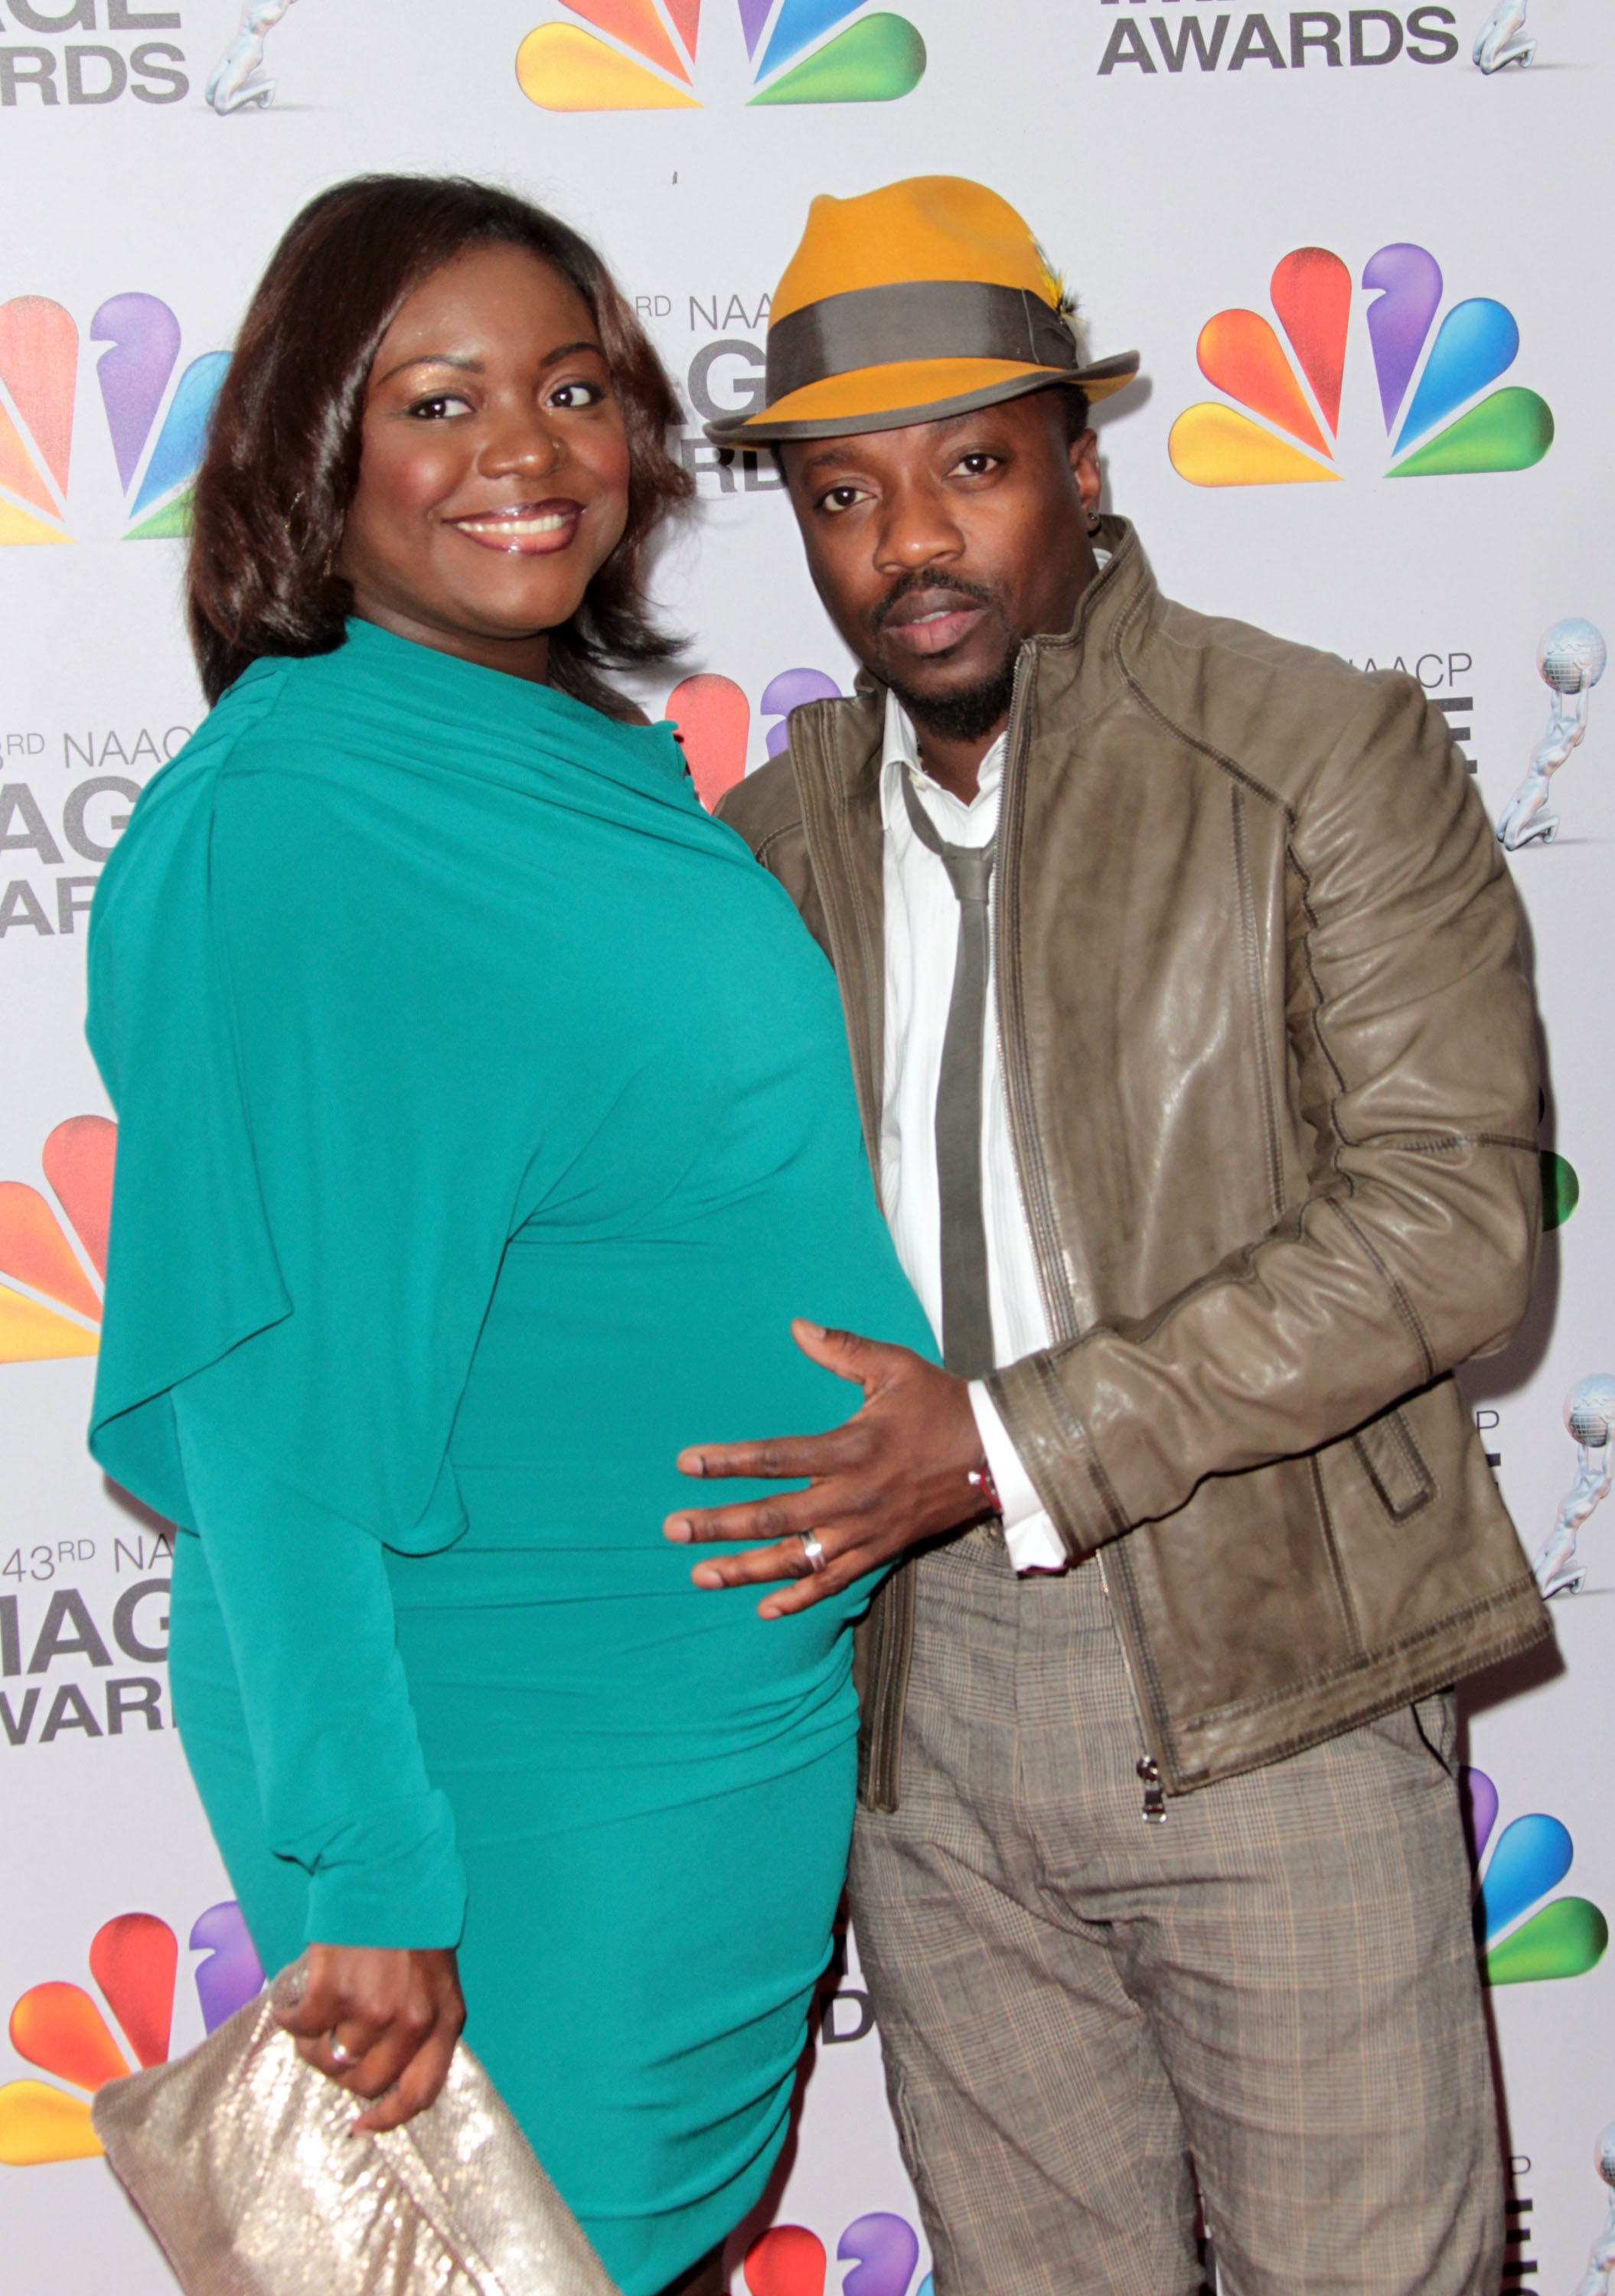 Anthony Hamilton (R) and his wife Tarsha McMillan arrive at the 43rd NAACP Image Awards held at The Shrine Auditorium, on February 17, 2012, in Los Angeles, California. | Source: Getty Images